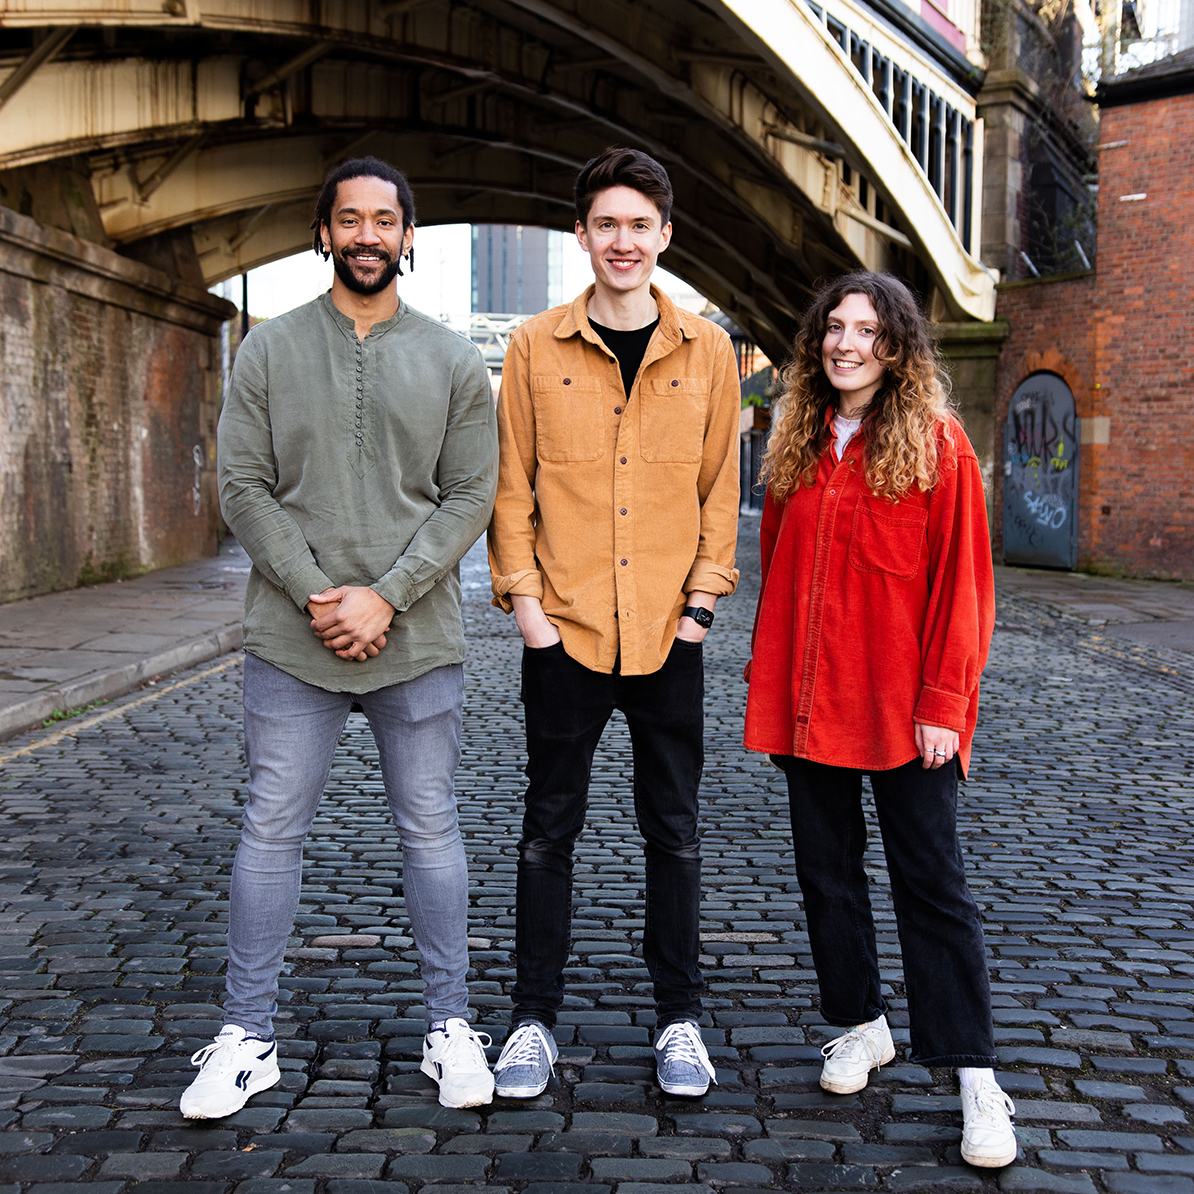 Three people standing together in the middle of a cobbled city street